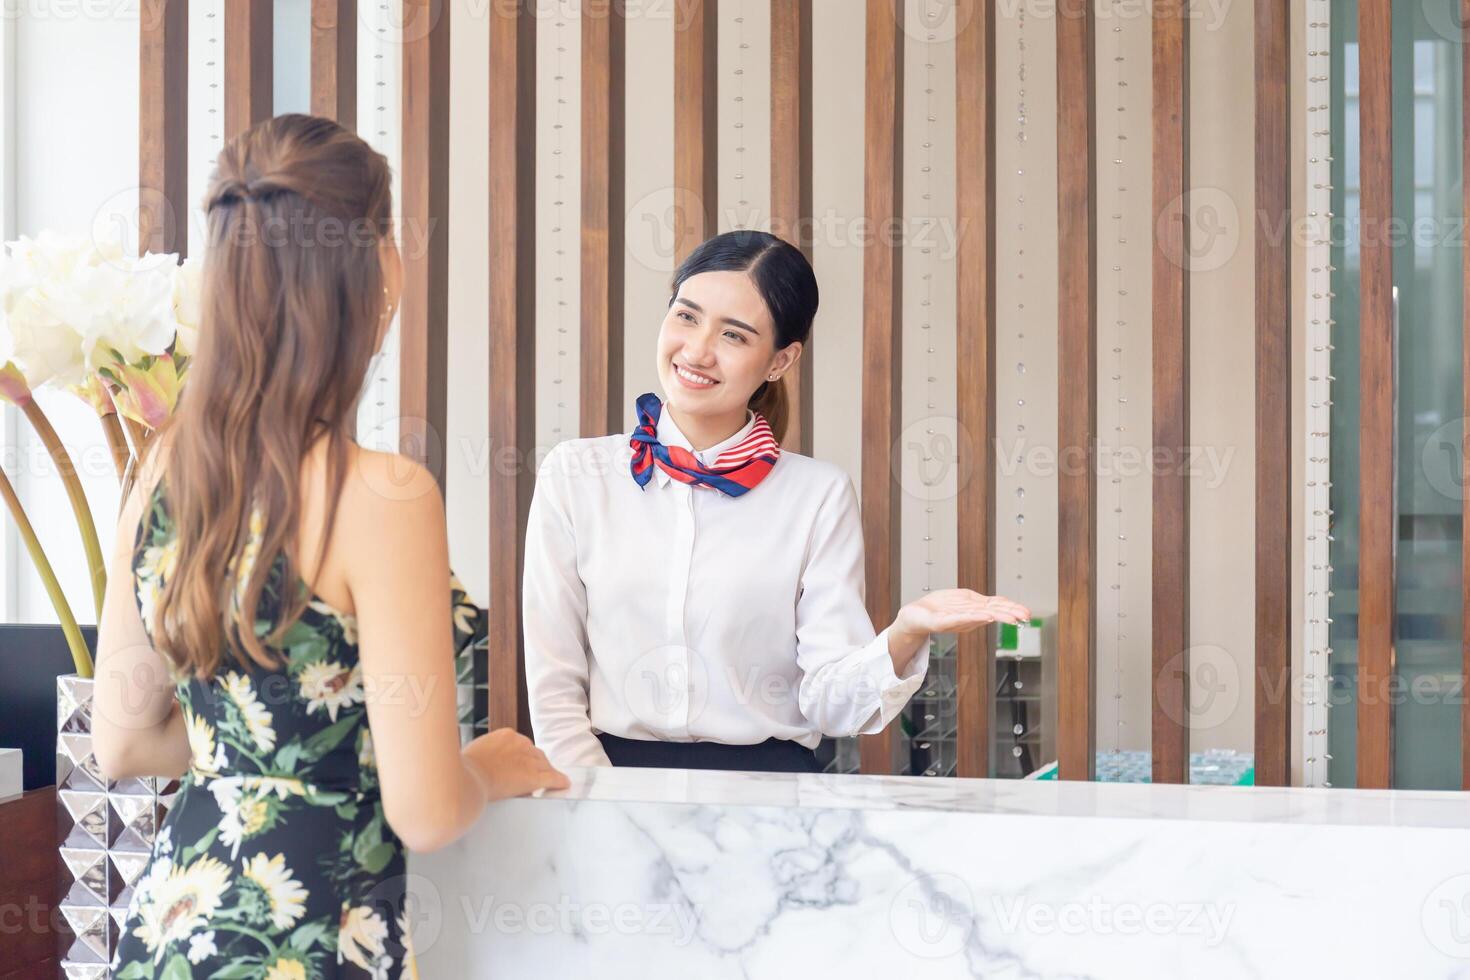 Young Asian woman receptionist behind the hotel counter attending to female guests. Smiling female receptionist working in a hotel photo